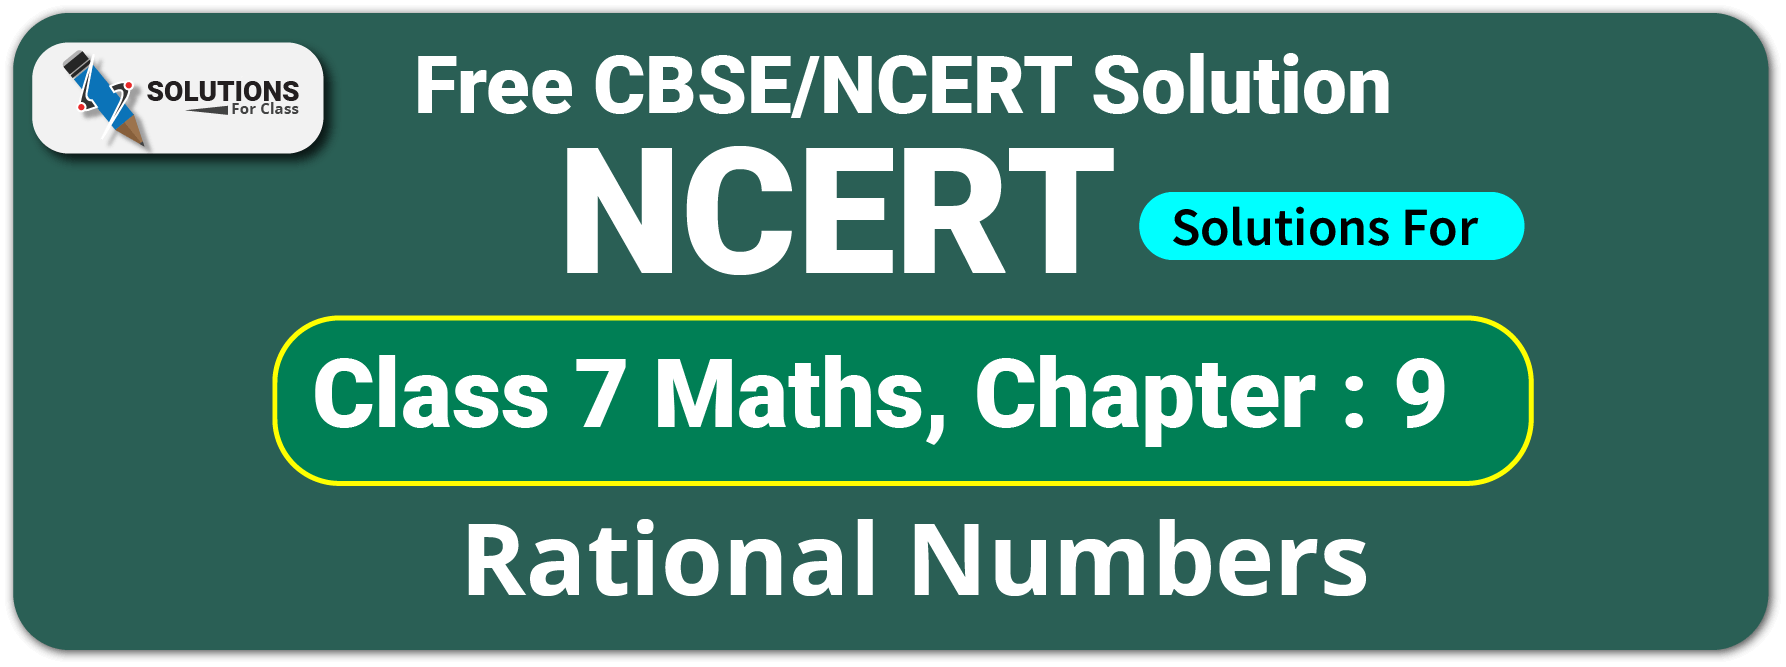 NCERT Solutions For Class 7 Maths Chapter 9, Rational Numbers